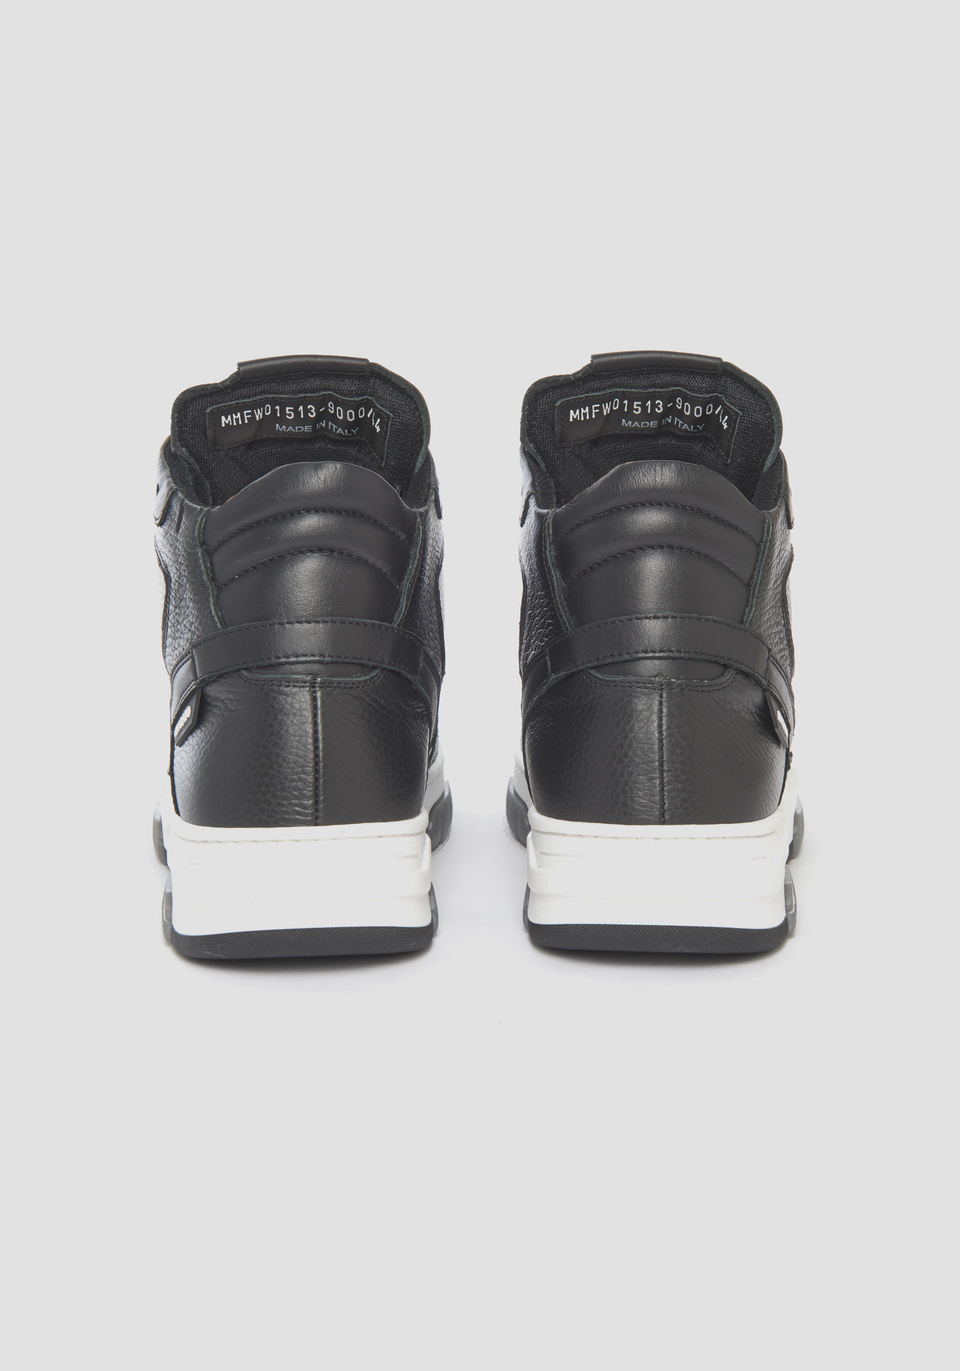 "KENDALL" MID SNEAKERS IN LEATHER - Antony Morato Online Shop